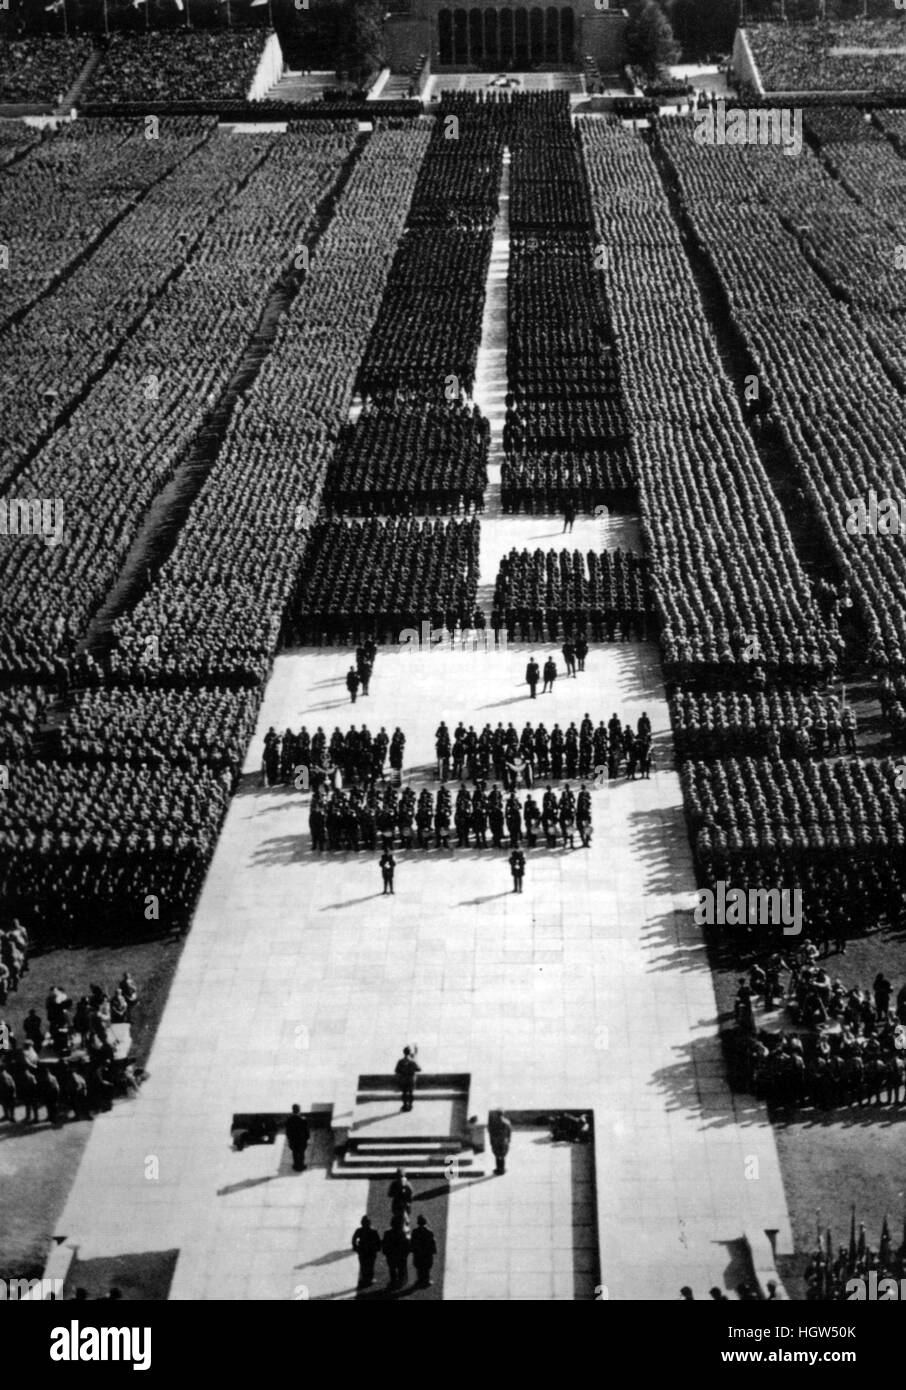 TRIUMPH OF THE WILL 1935 propaganda film directed by Leni Riefenstahl  covering the 1934 Nazi Party Congress in Nuremberg Stock Photo - Alamy